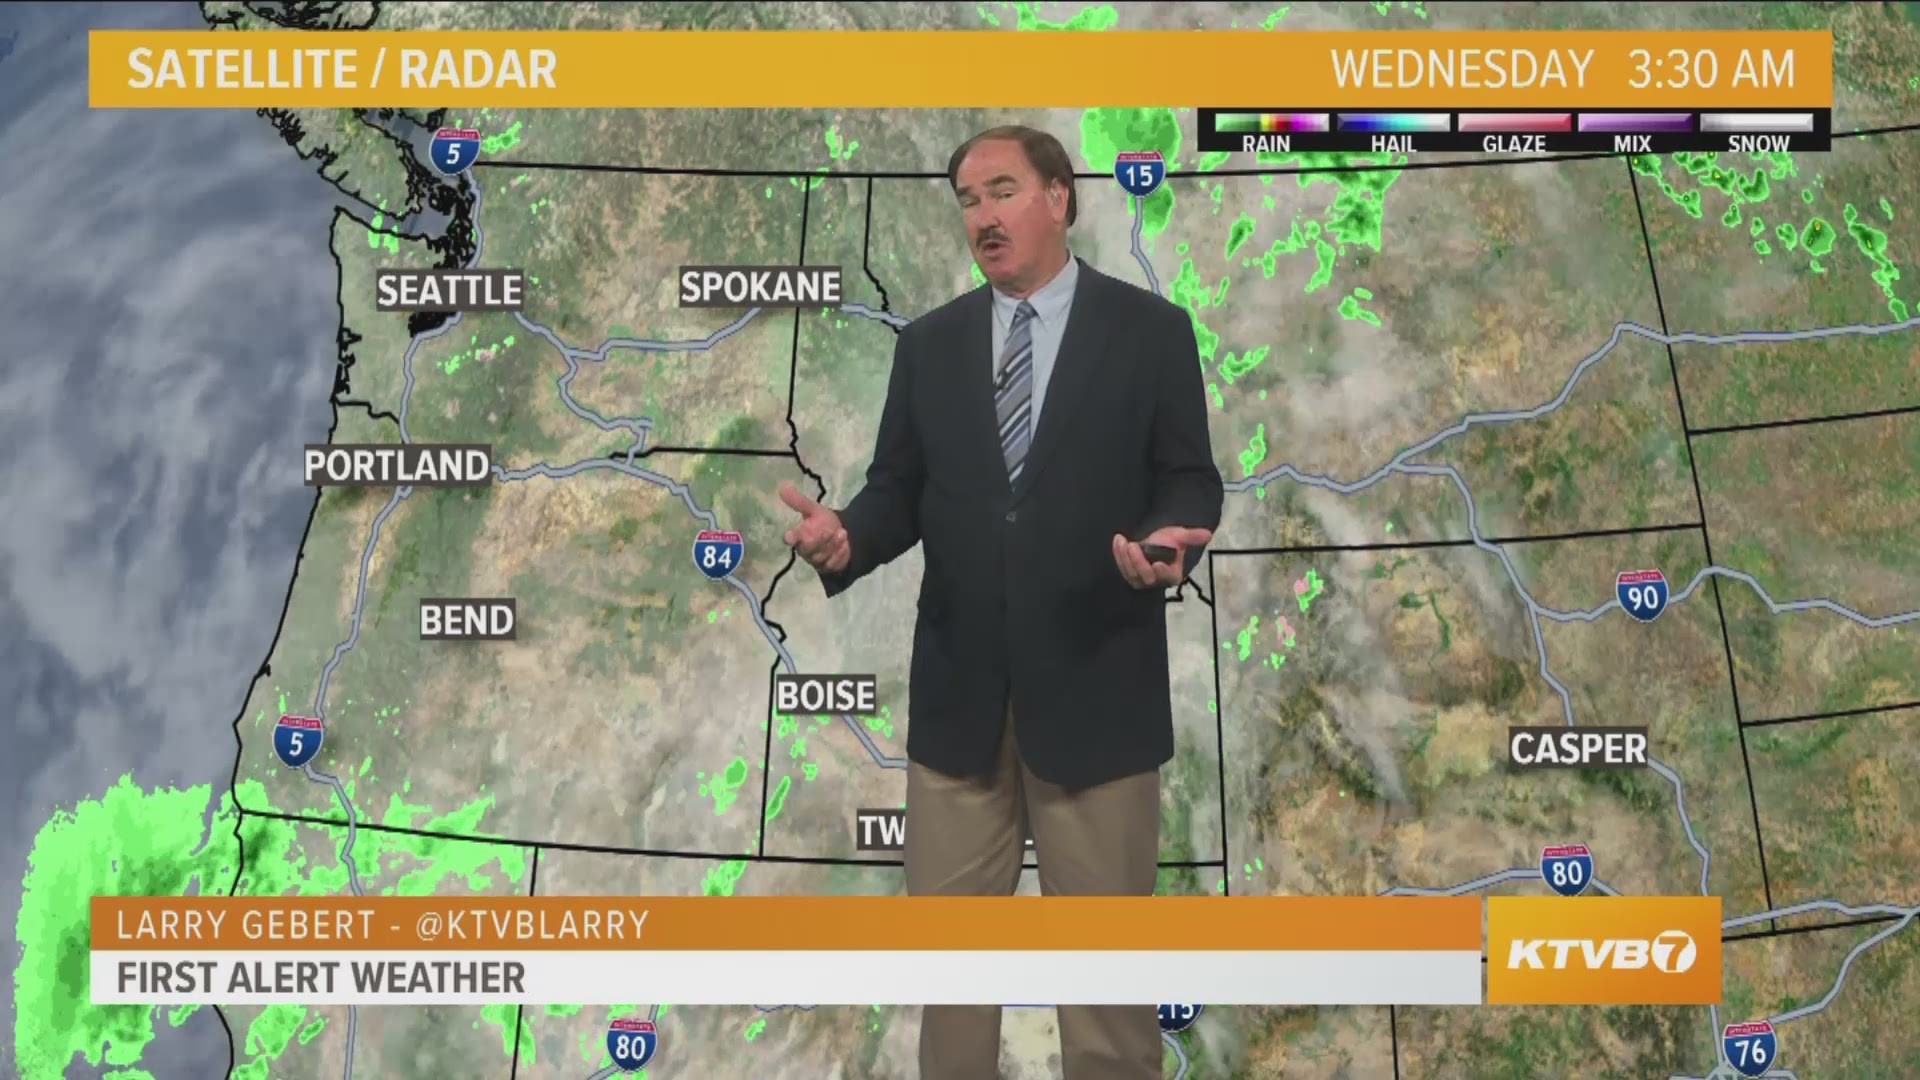 Larry Gebert says there will be some showers moving through the valley with temps reaching into the upper 70s.